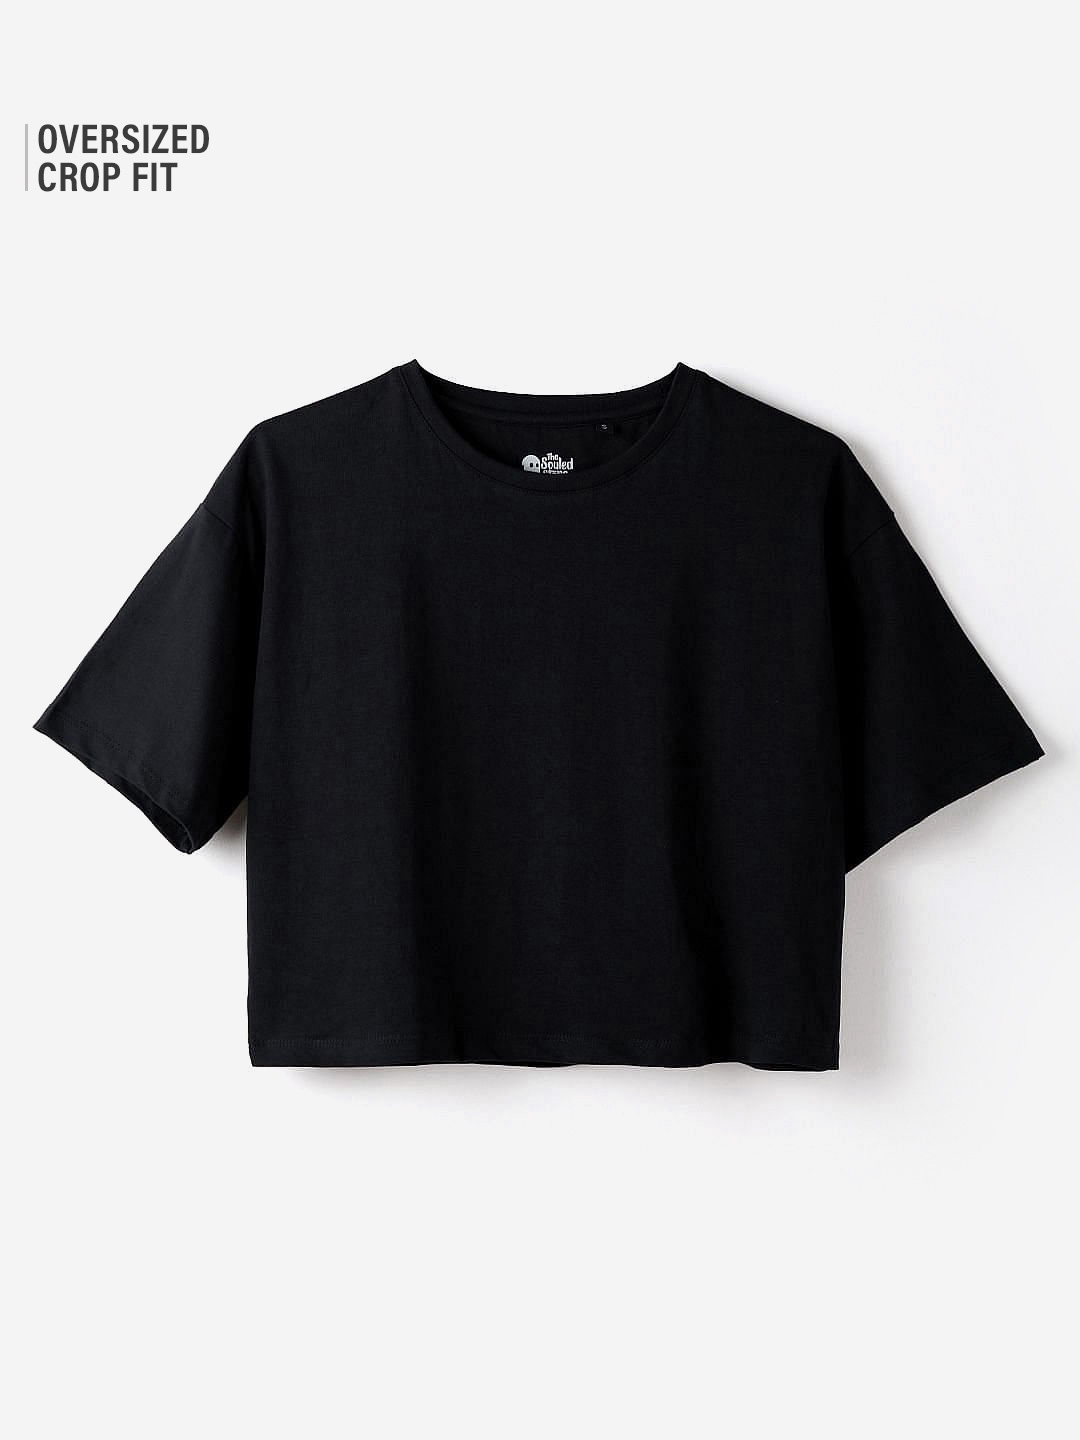 The Souled Store | Women's Solids: Black Women's Oversized Cropped T-Shirt